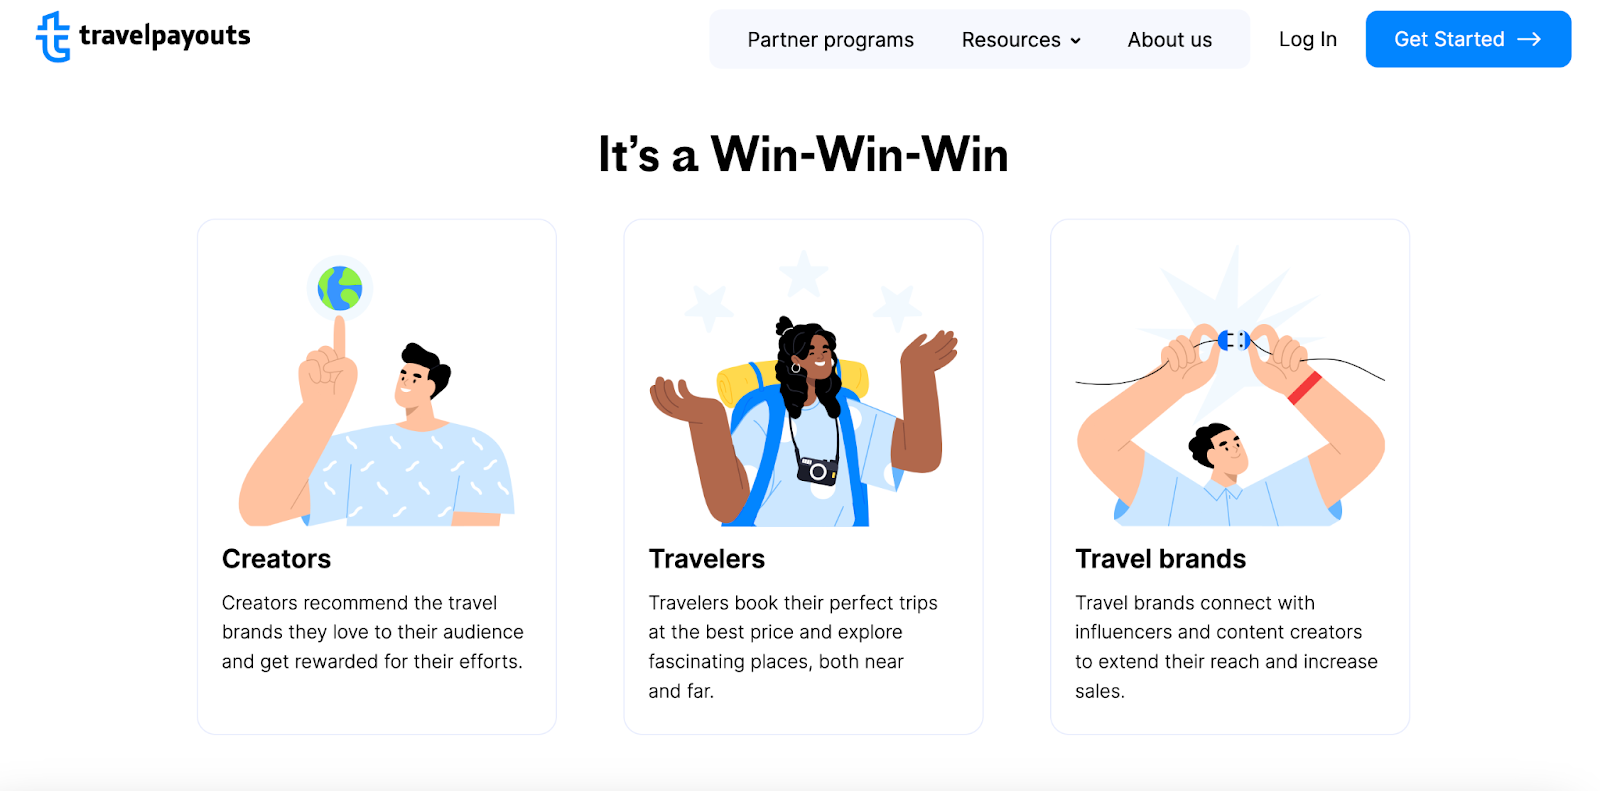 The image displays graphics explaining how affiliate marketing is a win-win-win for all involved including creators, travelers, and travel brands.